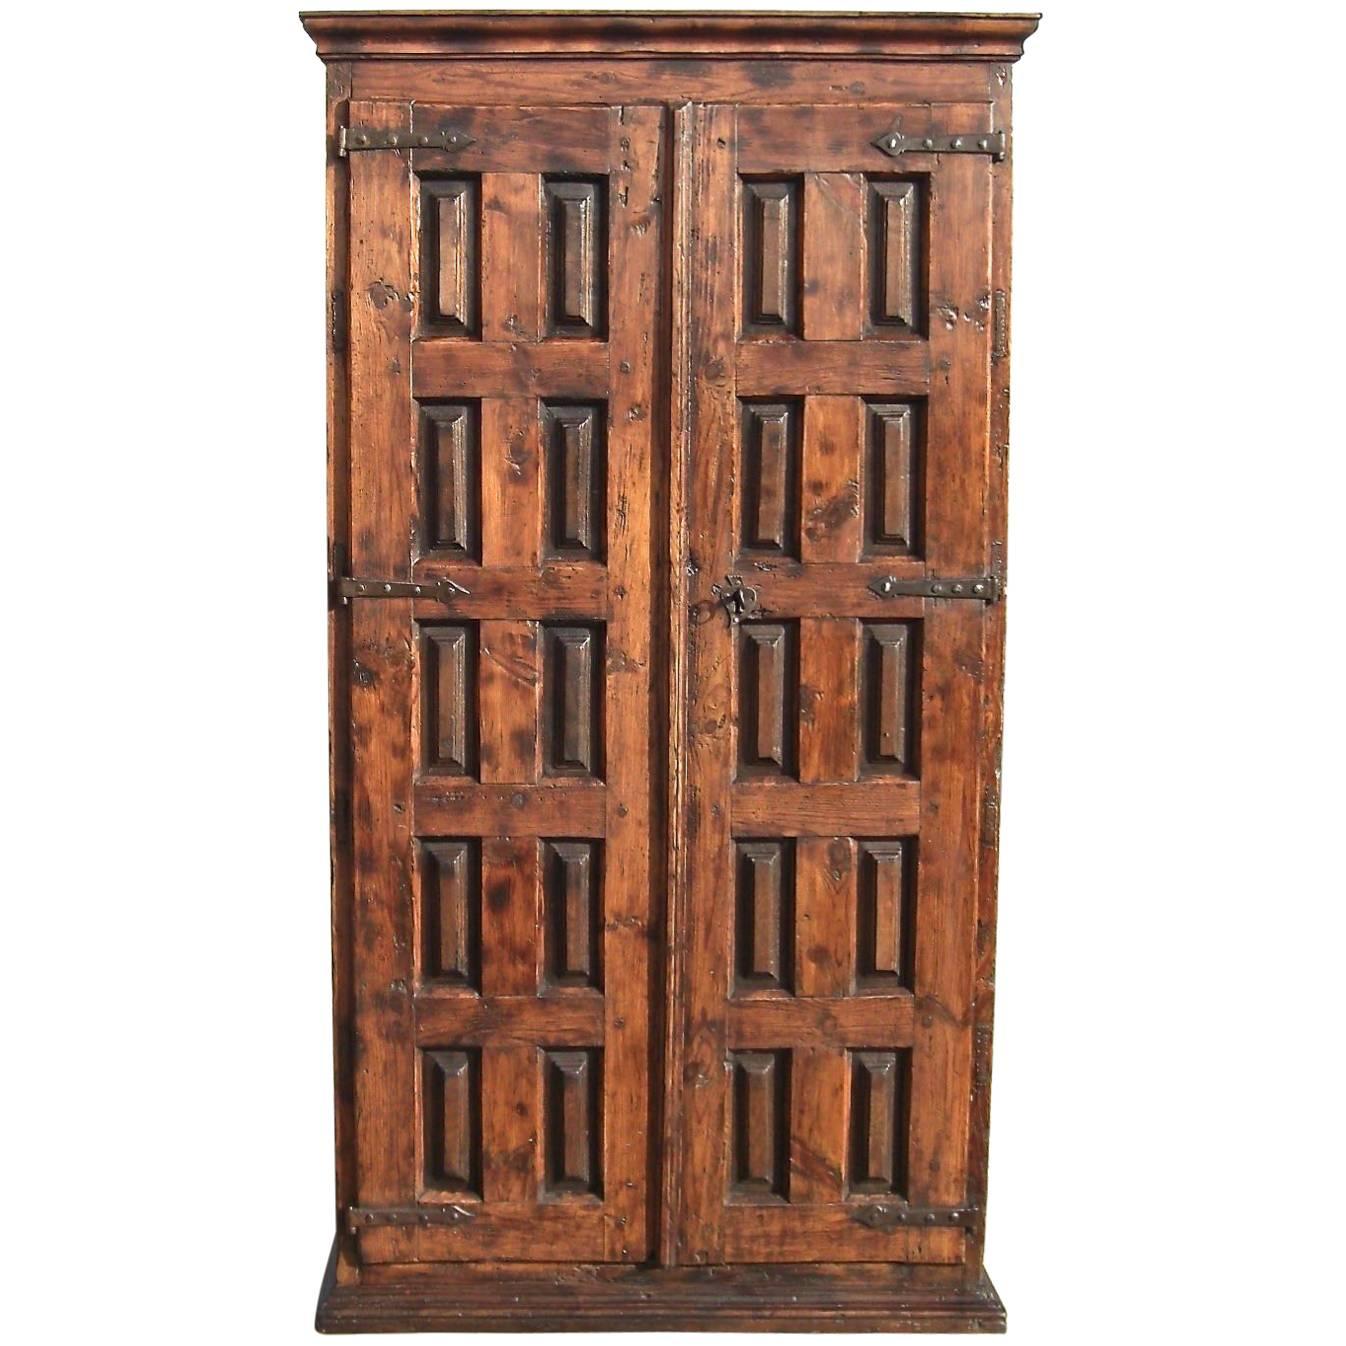 Early 18th Century Mixed-Wood Spanish Pantry Cabinet